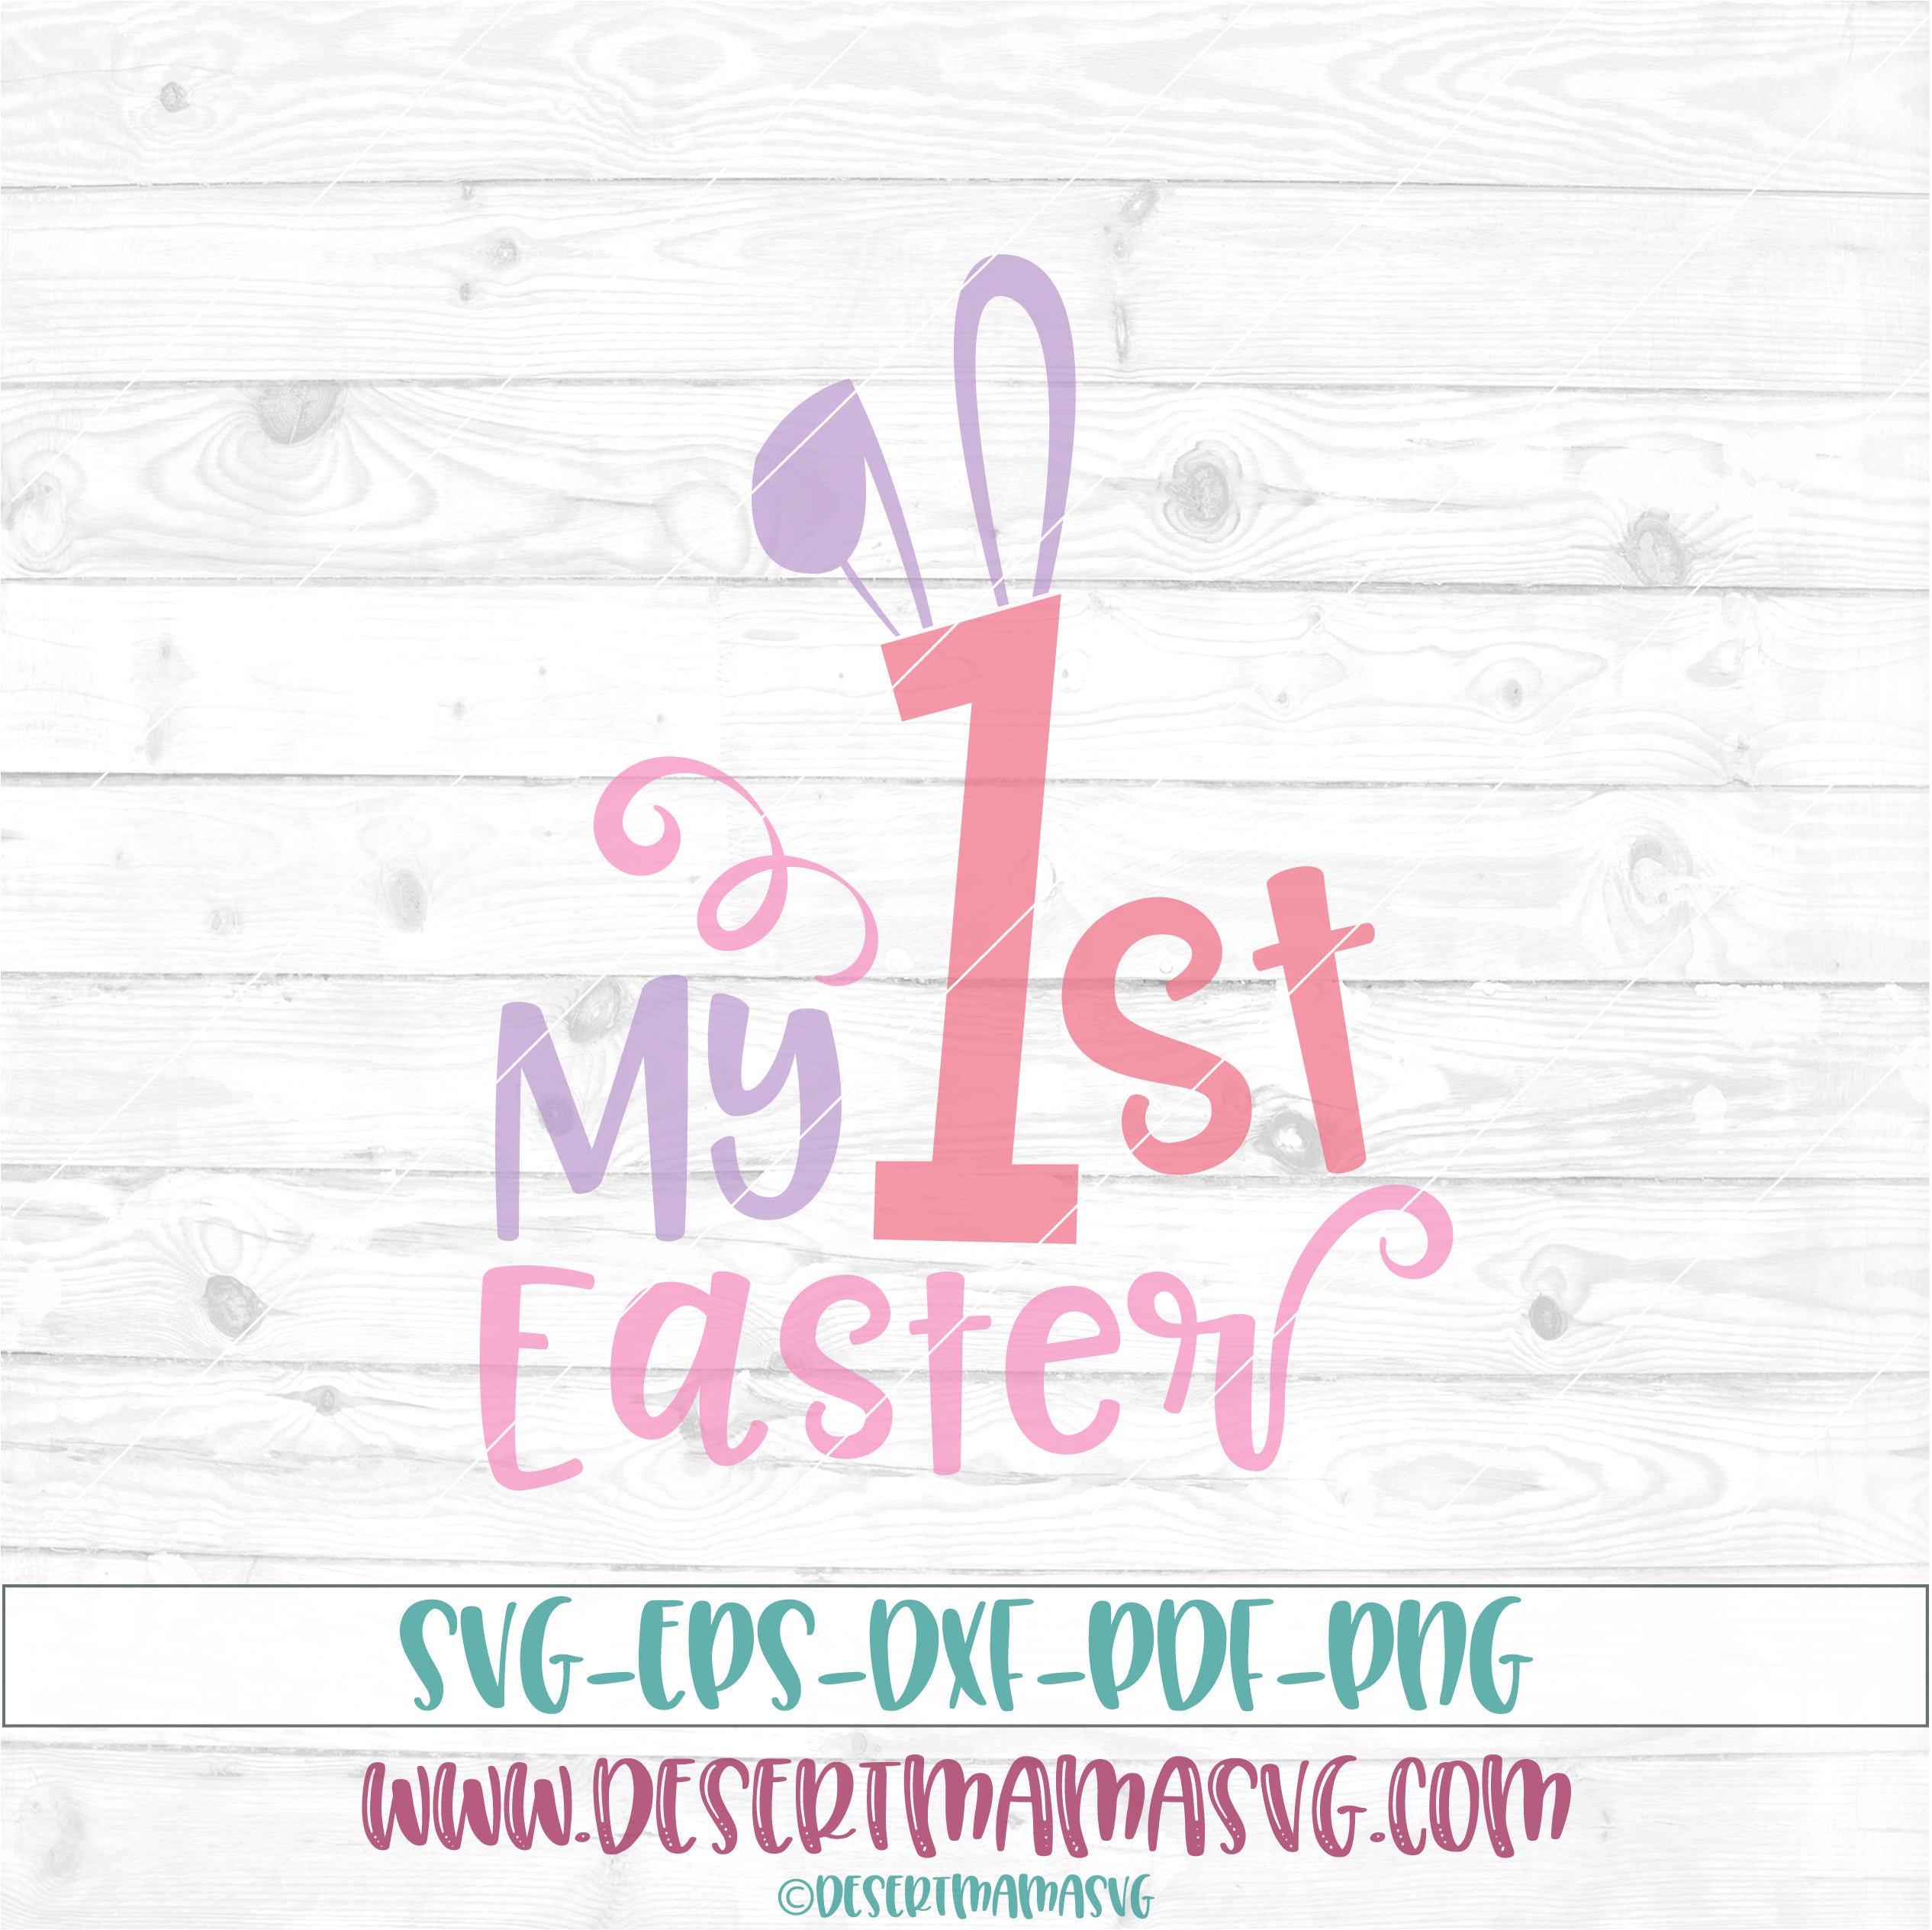 My 1st Easter svg eps dxf png cricut or cameo cut file